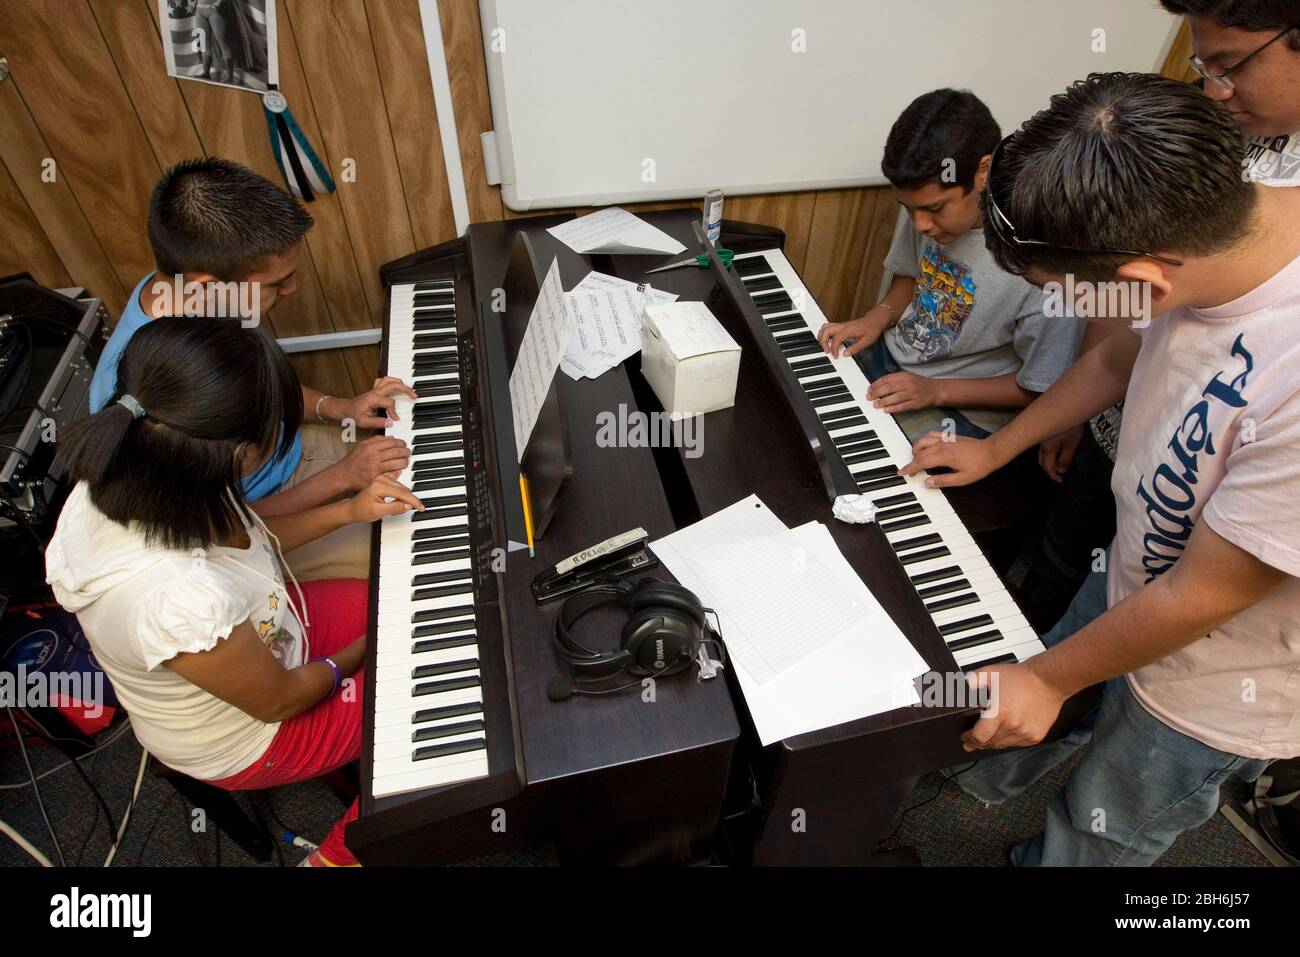 El Paso, Texas May 28, 2009: High school students learn piano keyboard in a  music appreciation class at Mission Early College High School. Motivated  students can earn an associate degree at El